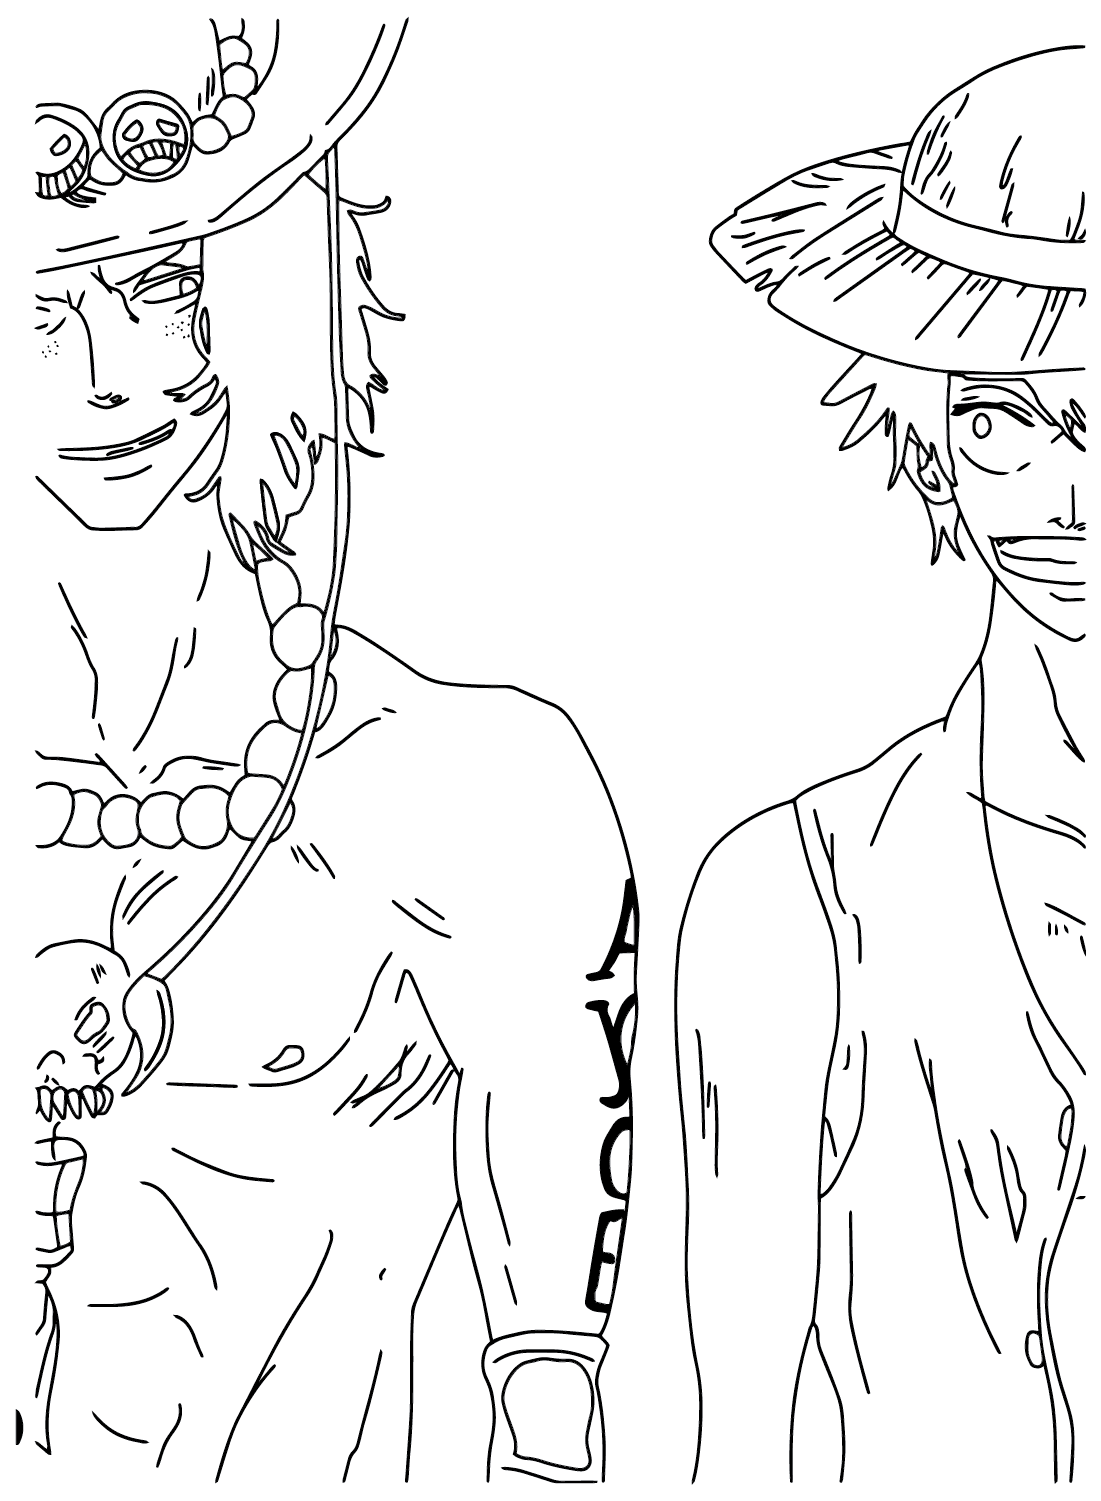 Coloring Page Ace and Luffy from Portgas D. Ace